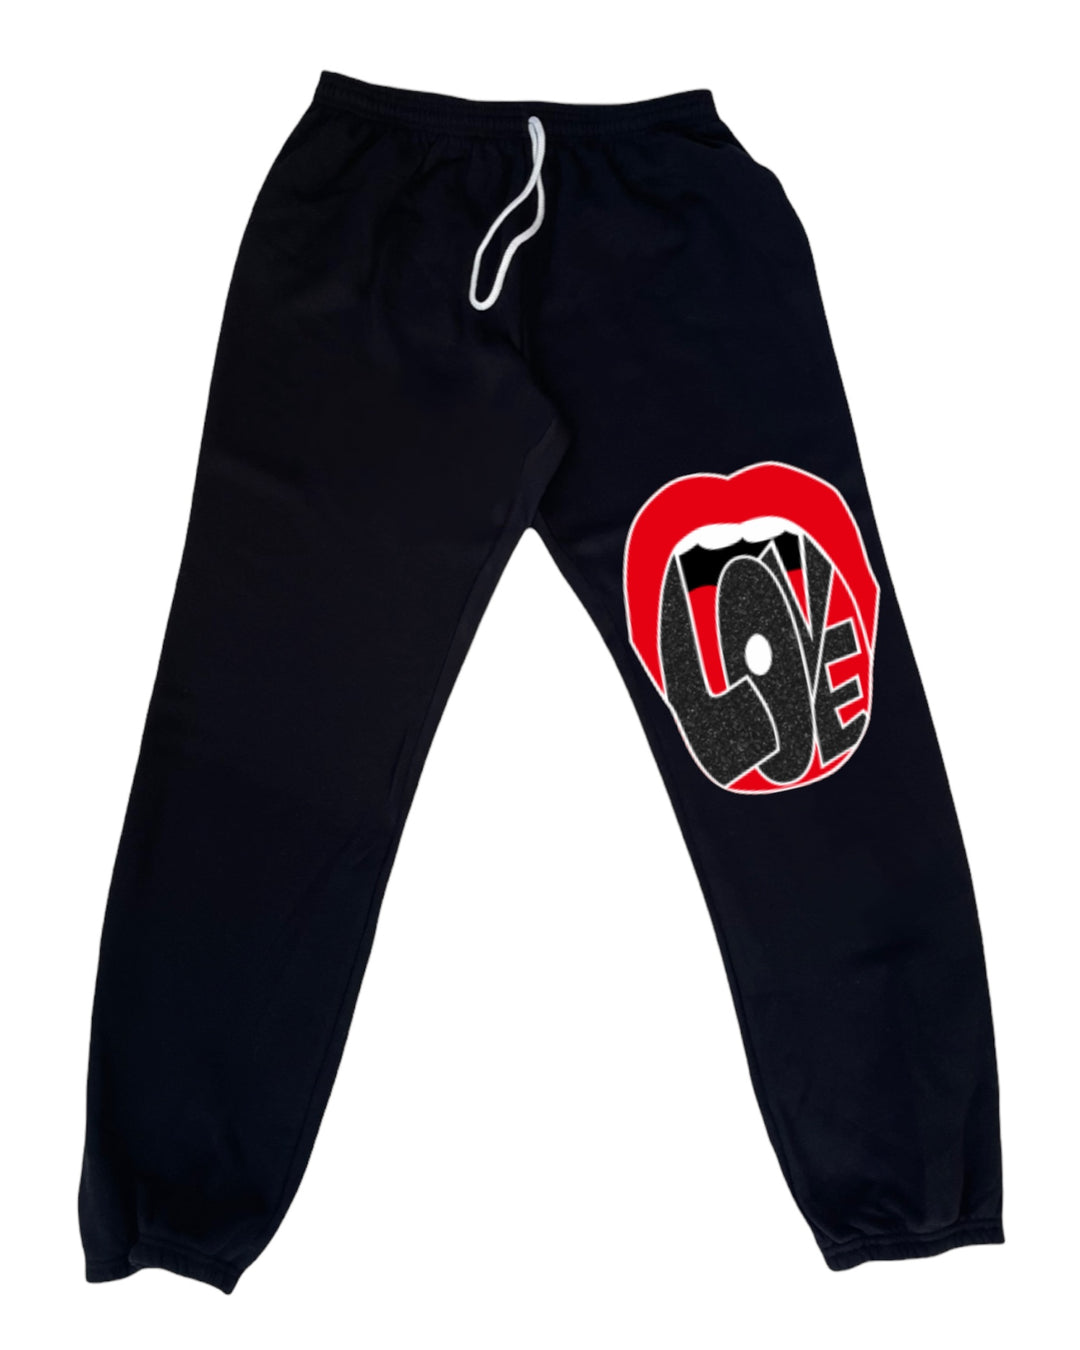 Love Mouth Sweatpants- Black/ Red